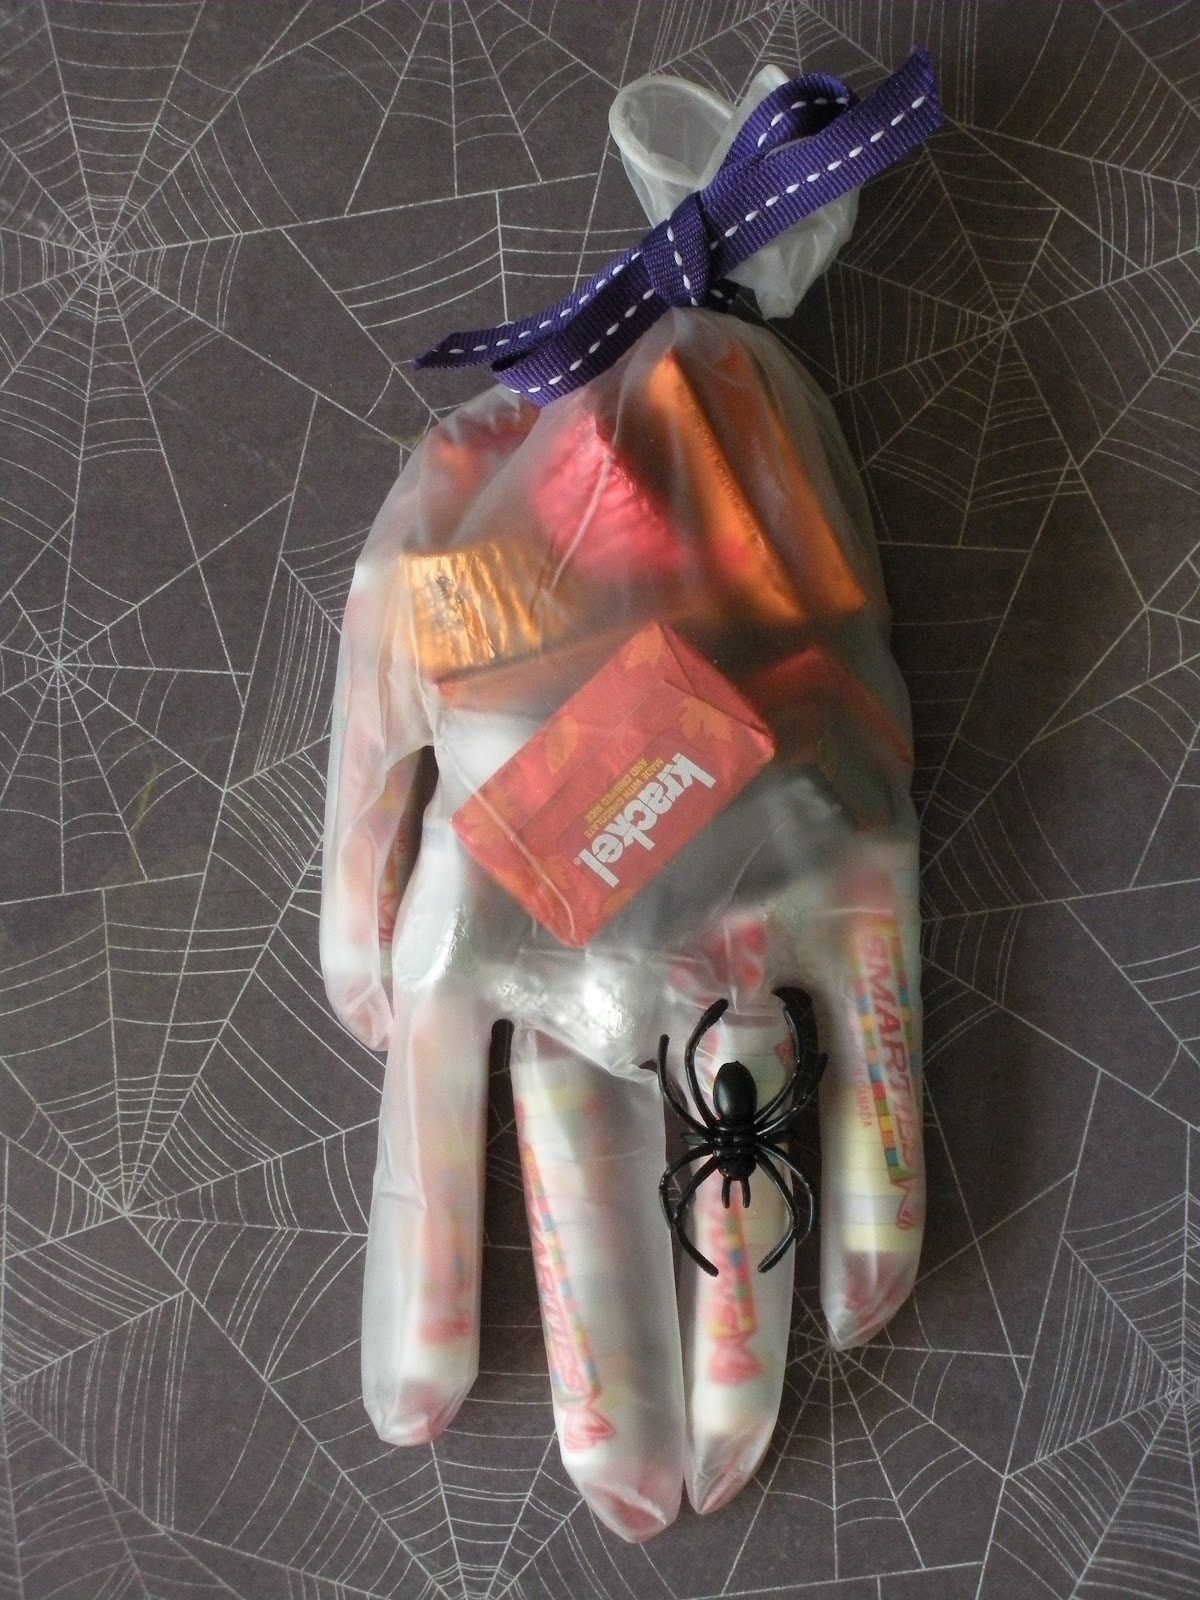 Halloween Party Gift Ideas
 15 Easy Last Minute Halloween Party Favor Ideas Ella Claire